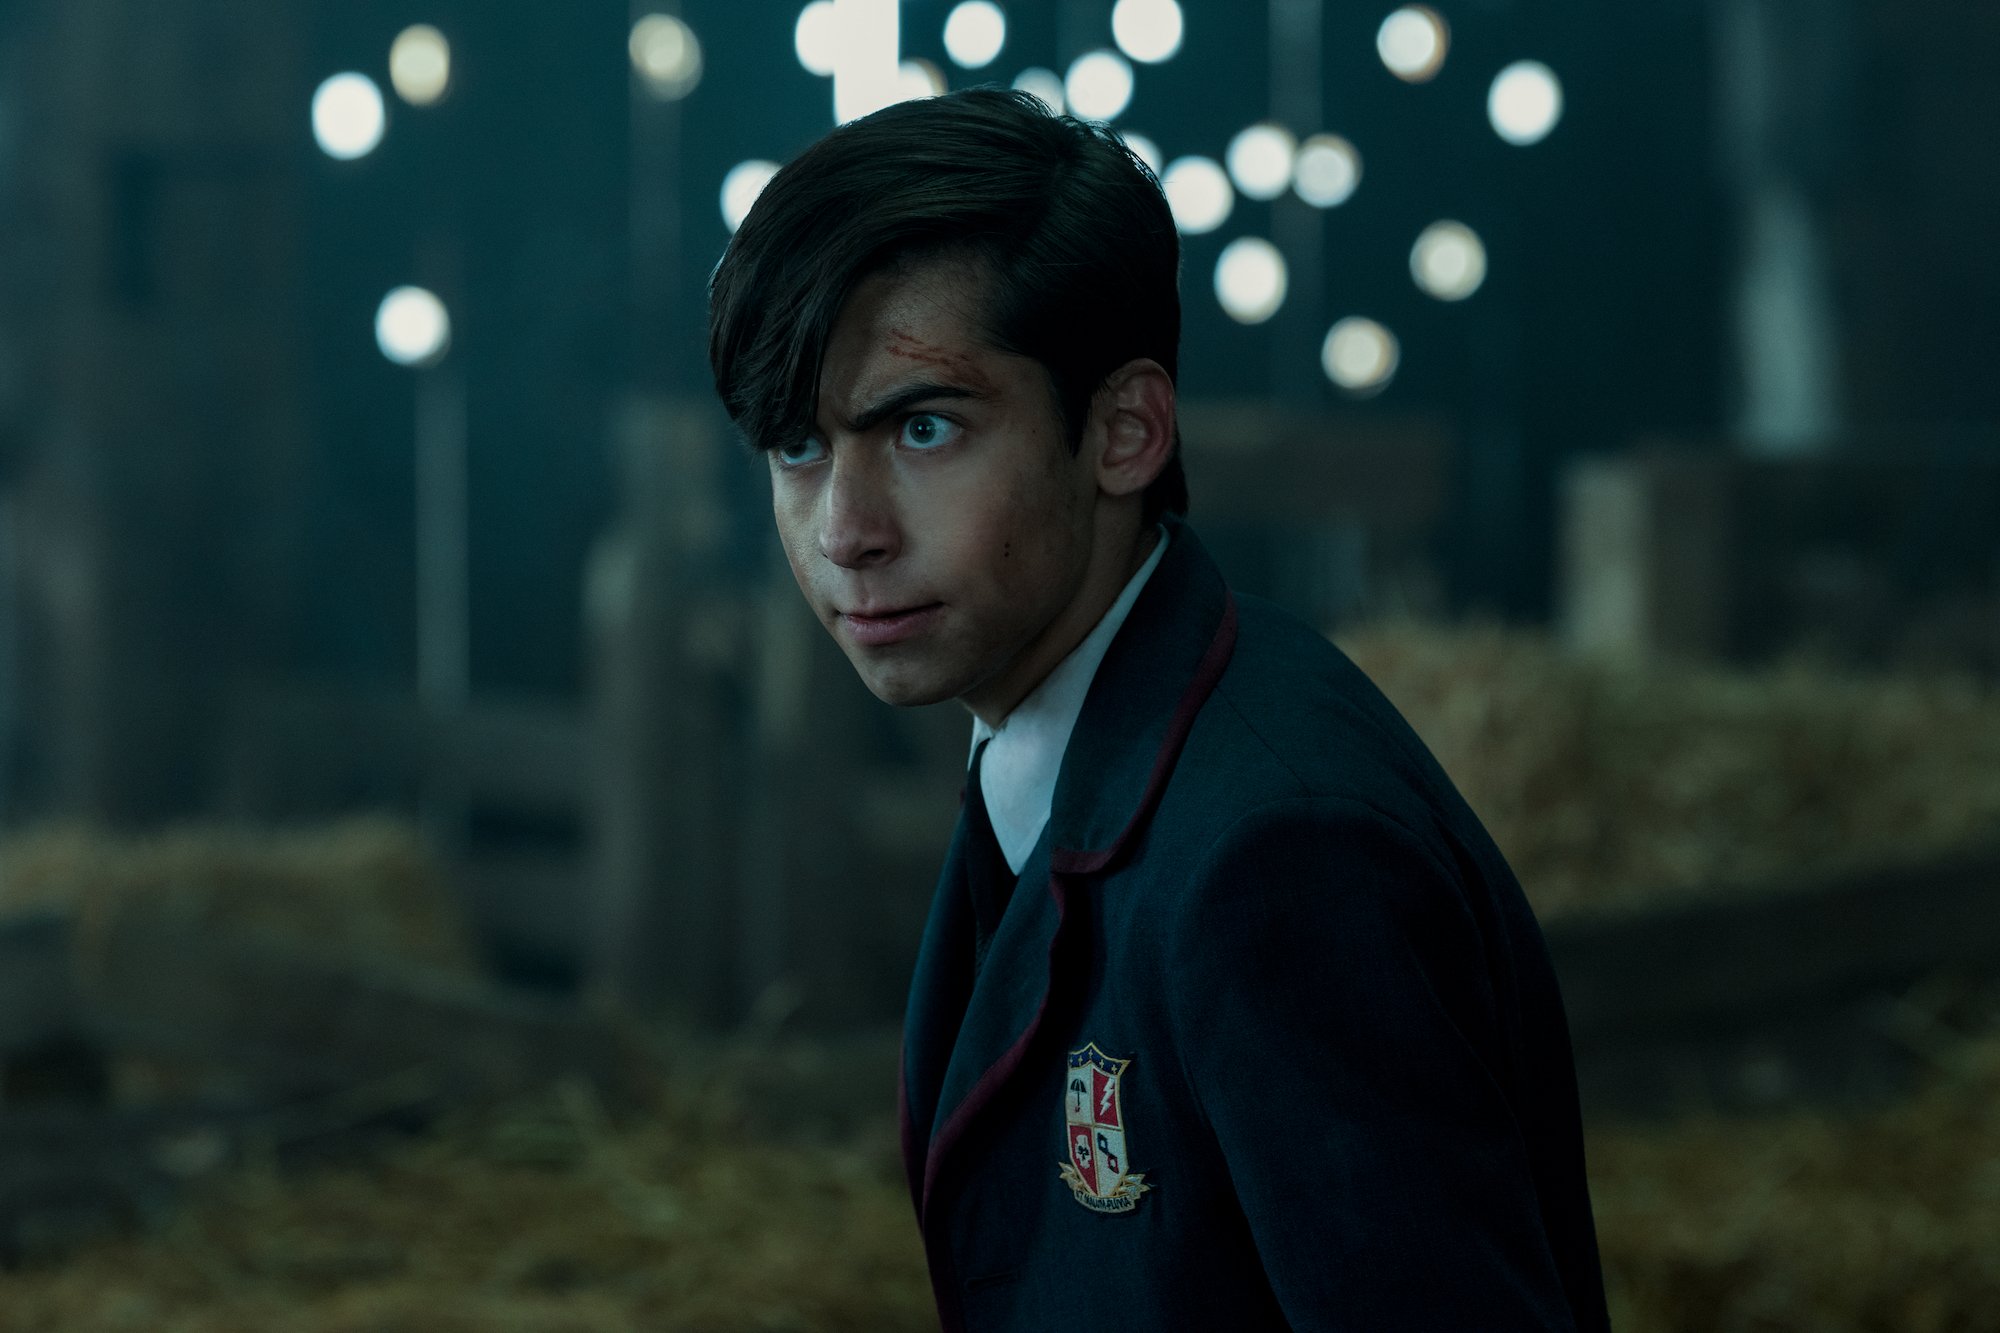 Number Five, played by Aiden Gallagher, wearing his uniform in a production still from 'The Umbrella Academy' Season 2